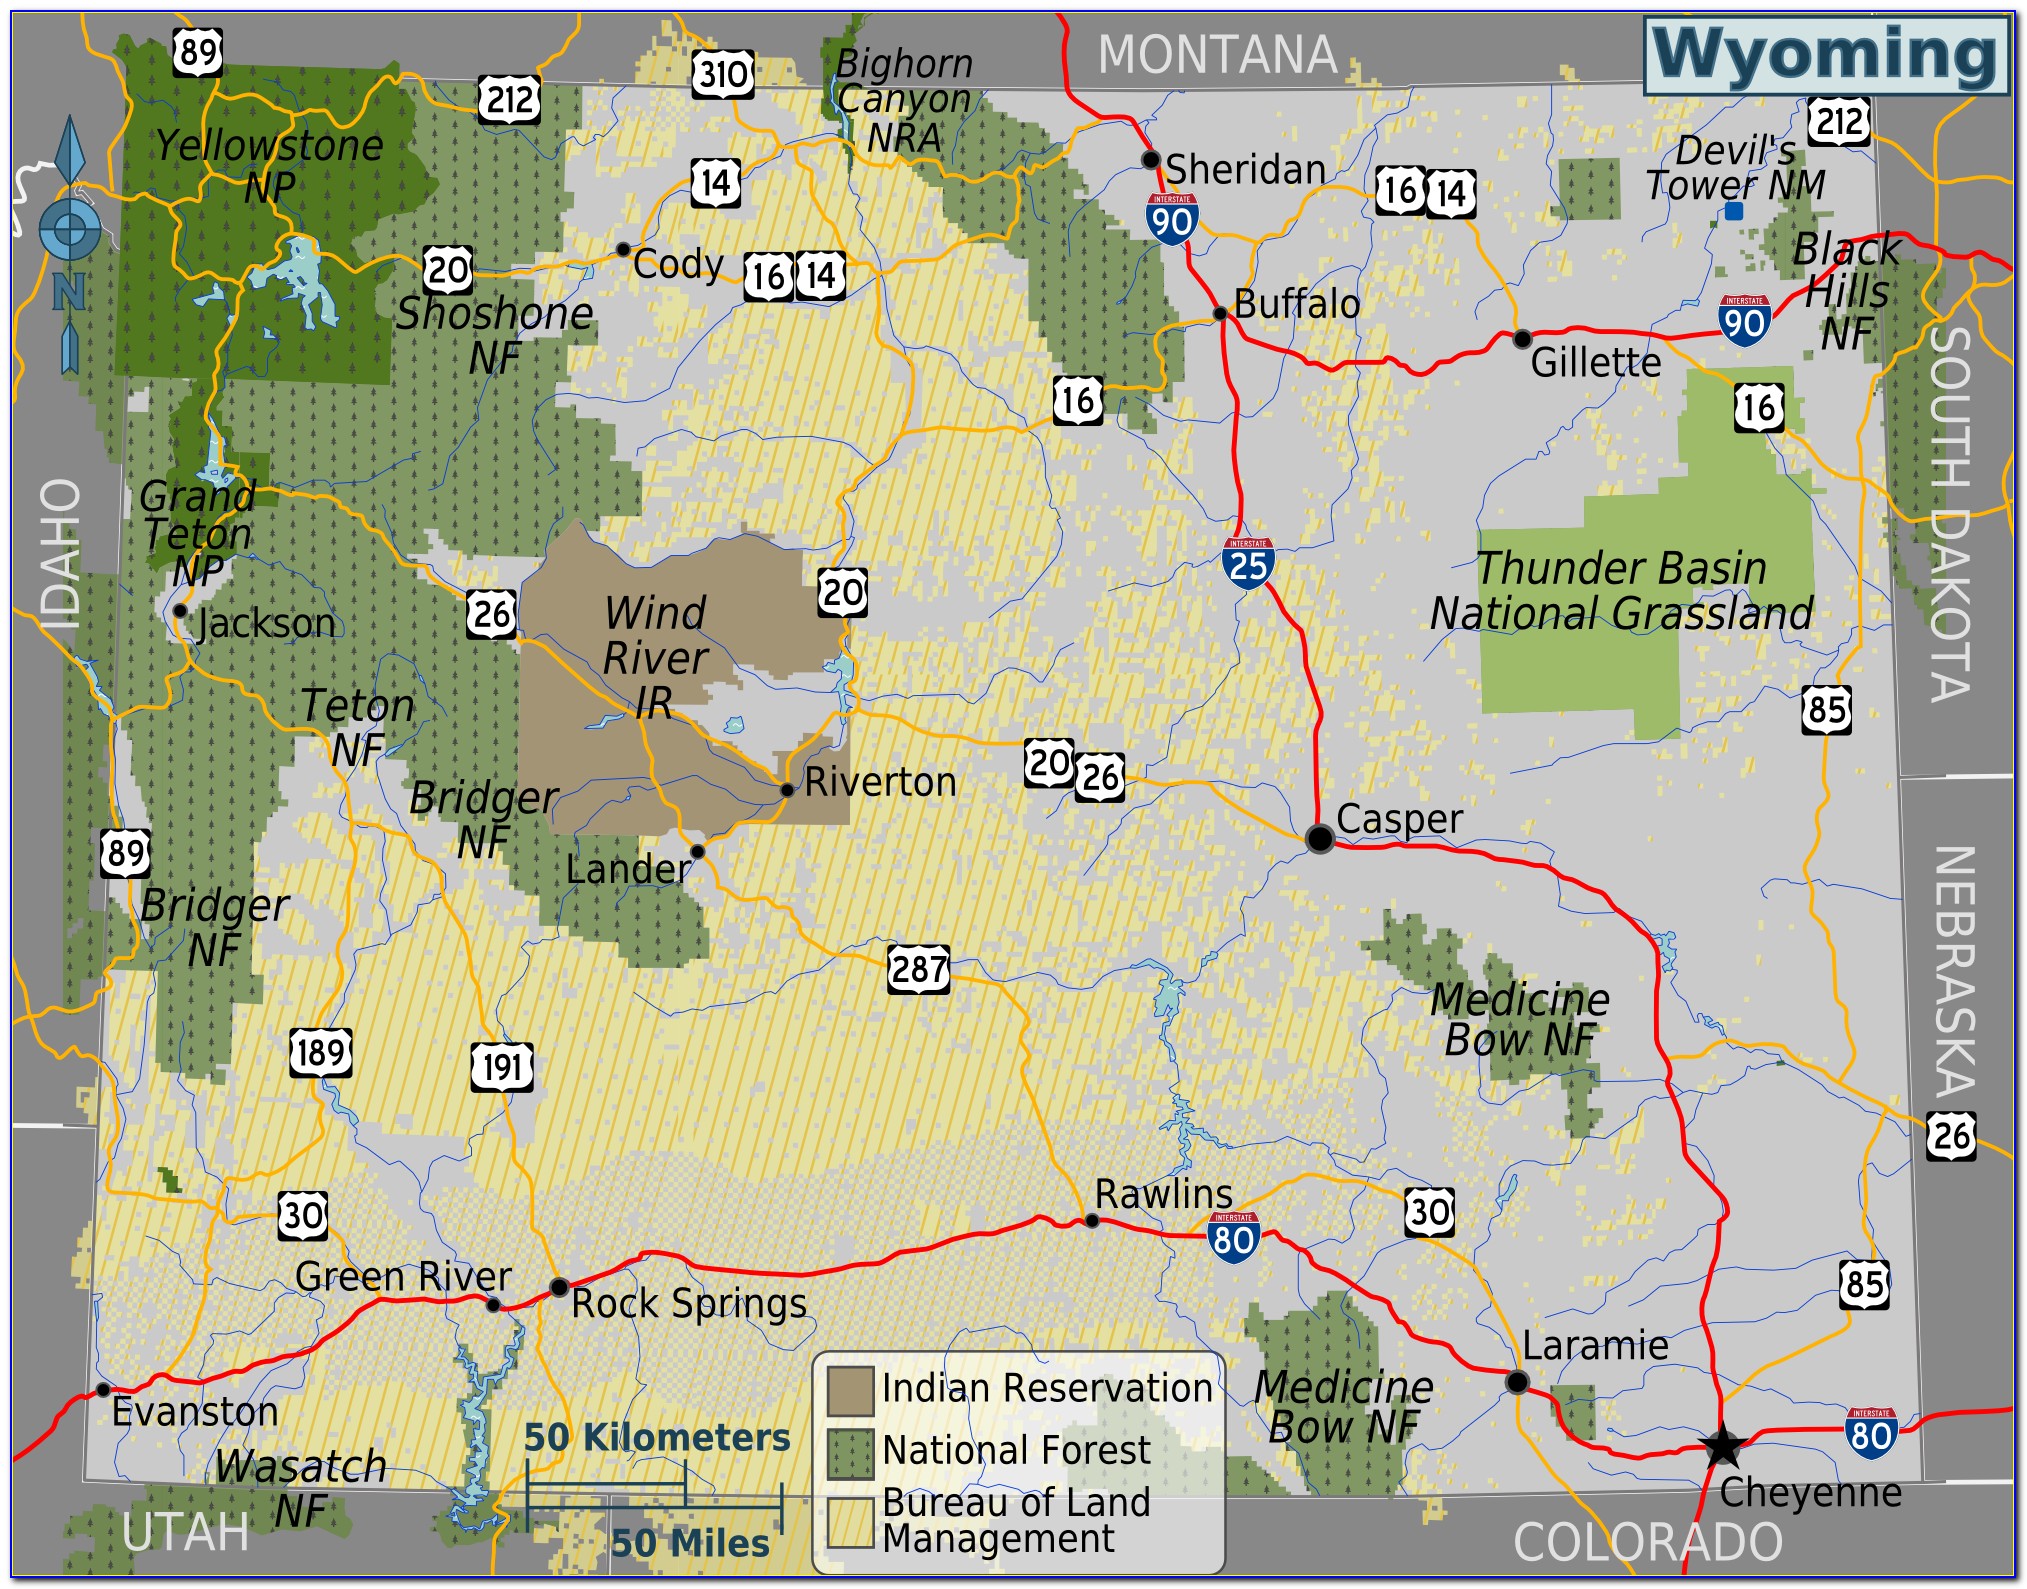 Wyoming Blm Hunting Maps